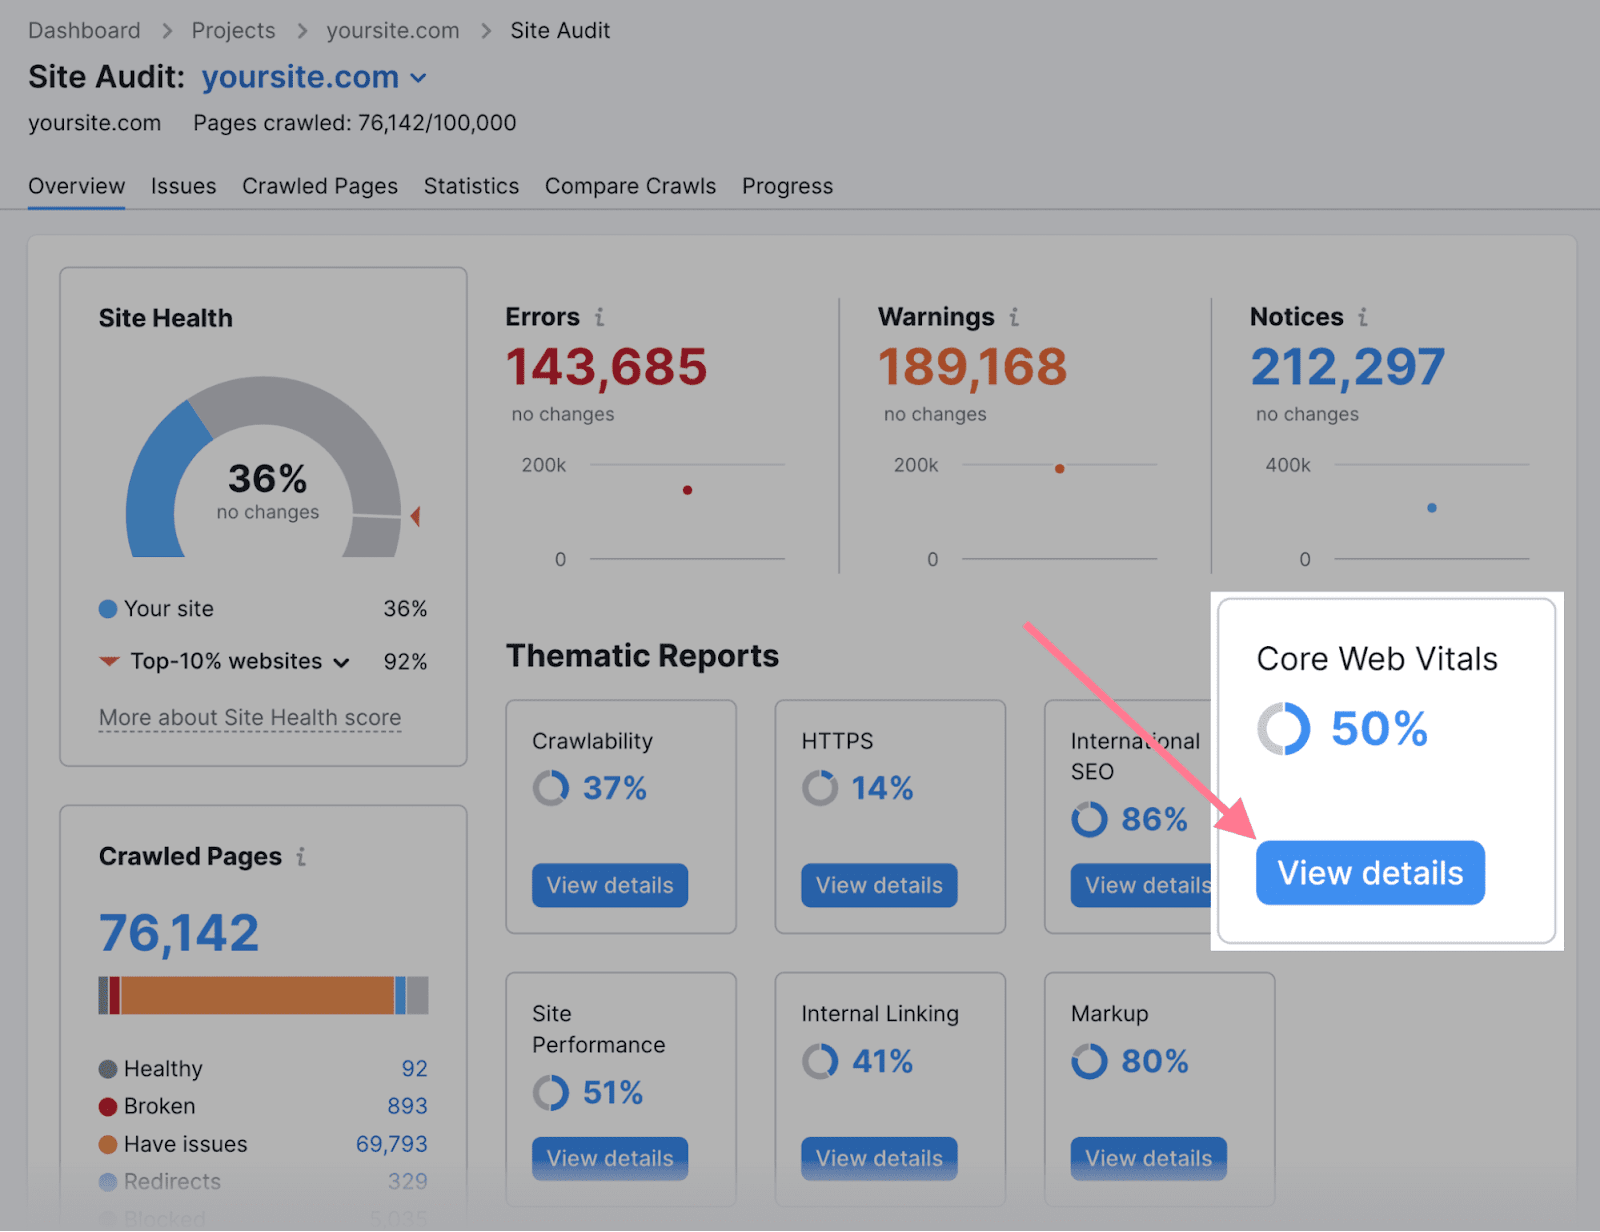 “Core Web Vitals” widget highlighted in Site Audit's "Overview" dashboard